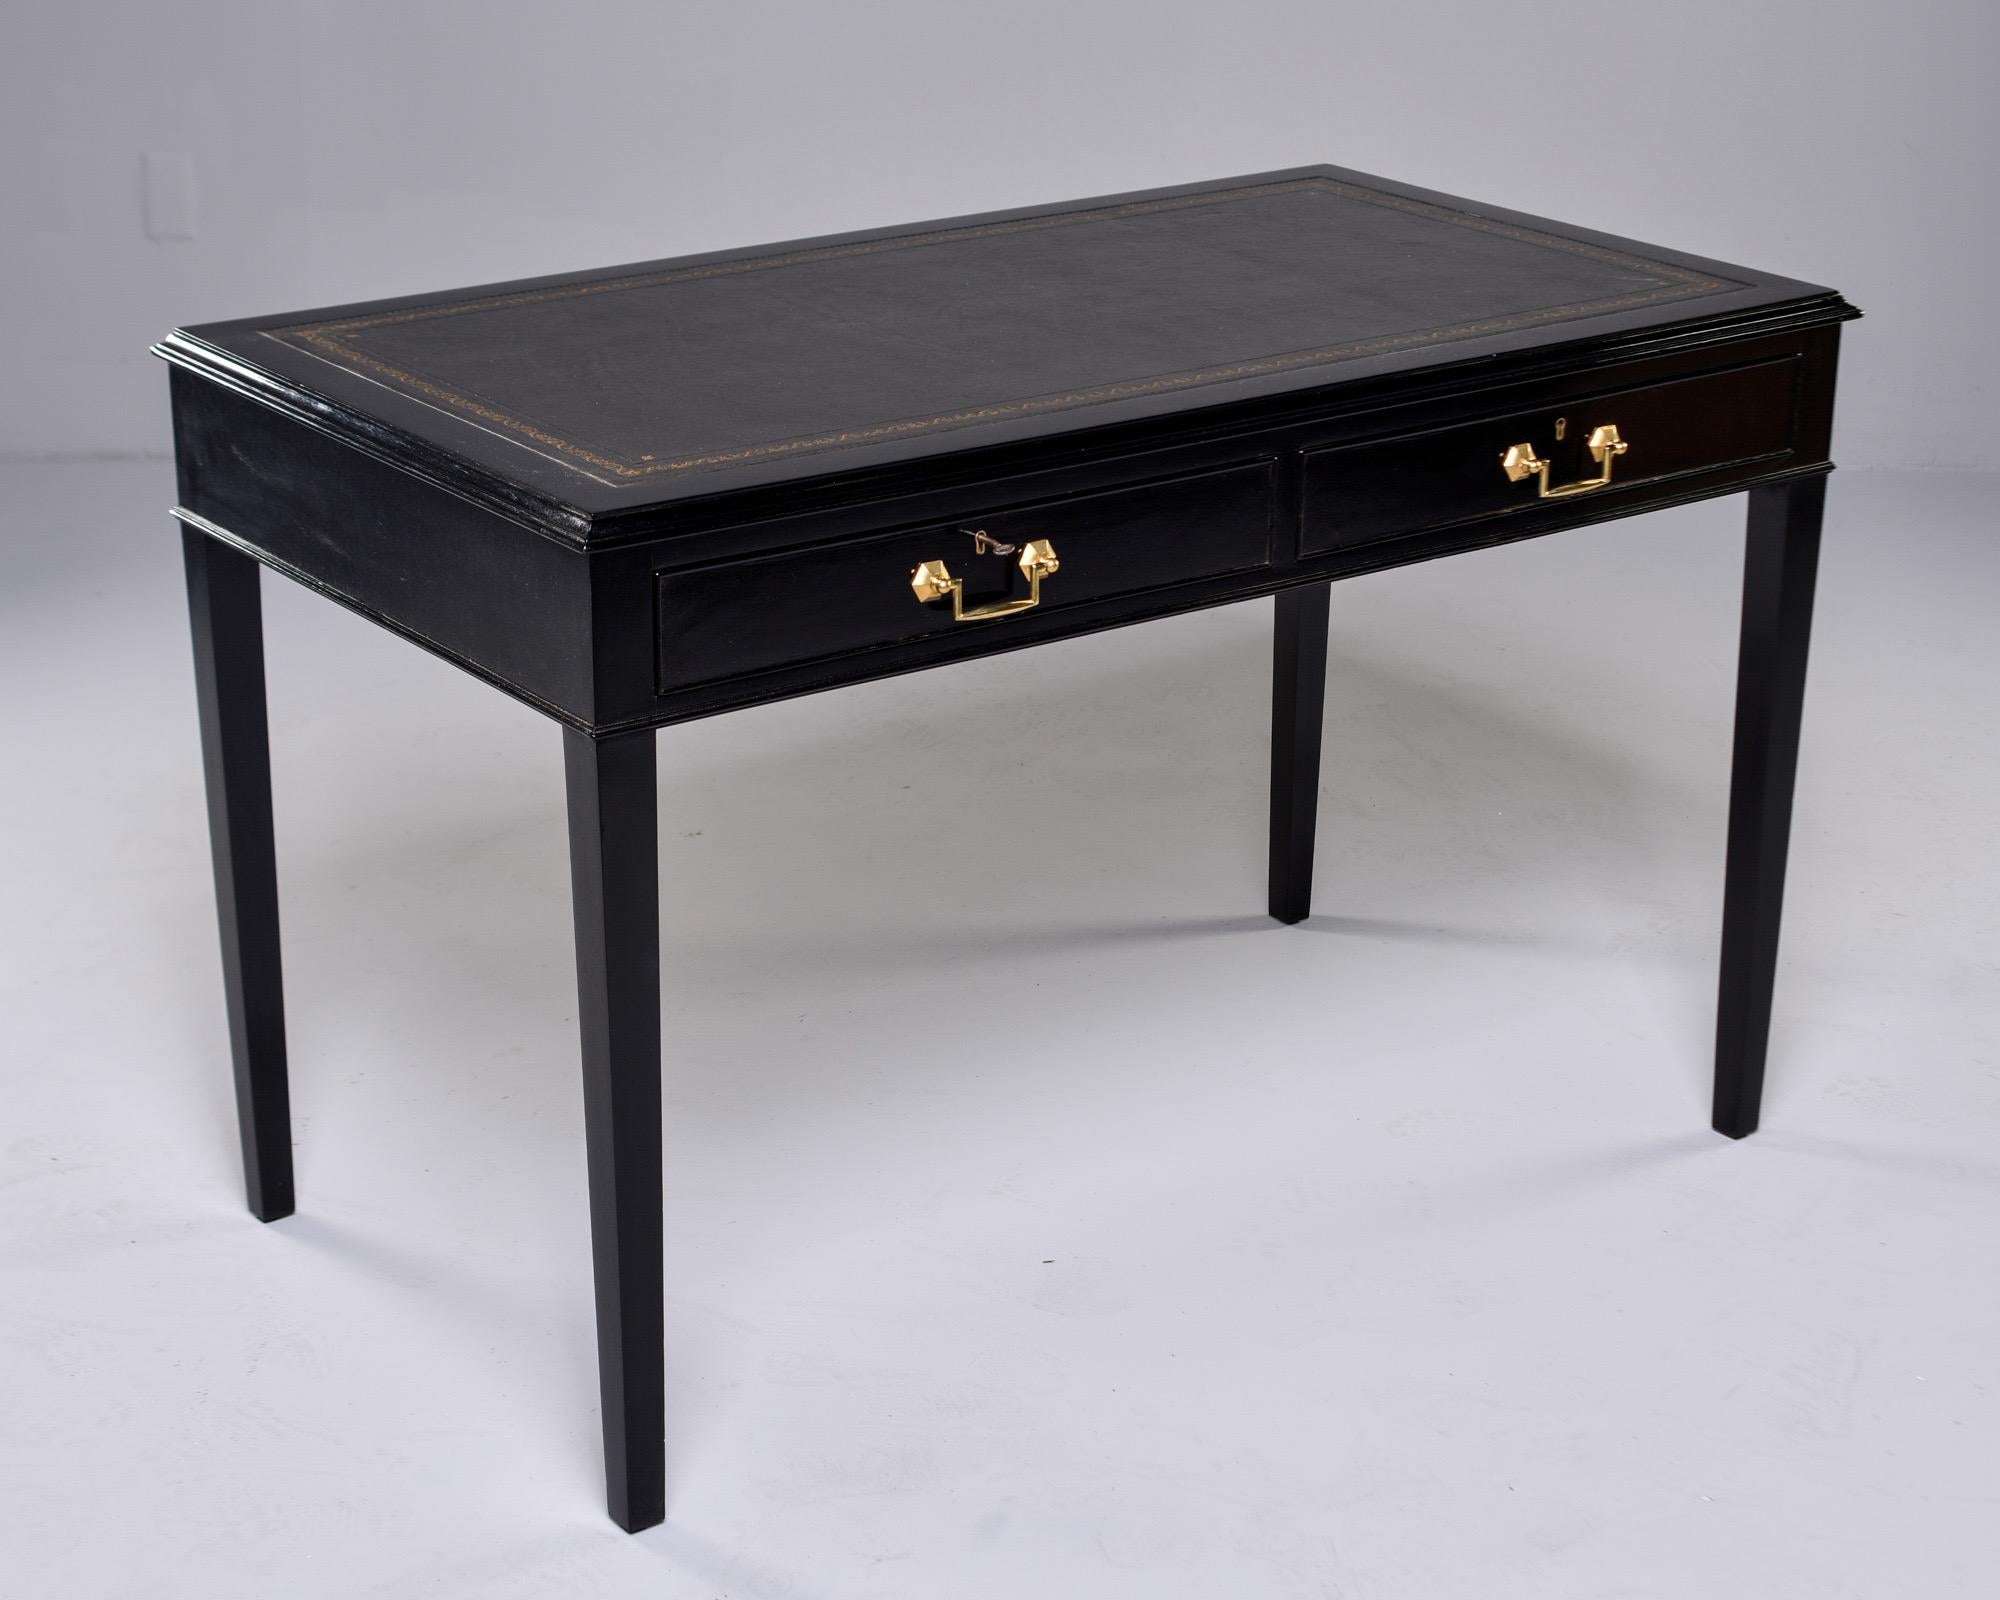 20th Century English Ebonised Partners Two Drawer Desk with Black Leather Top